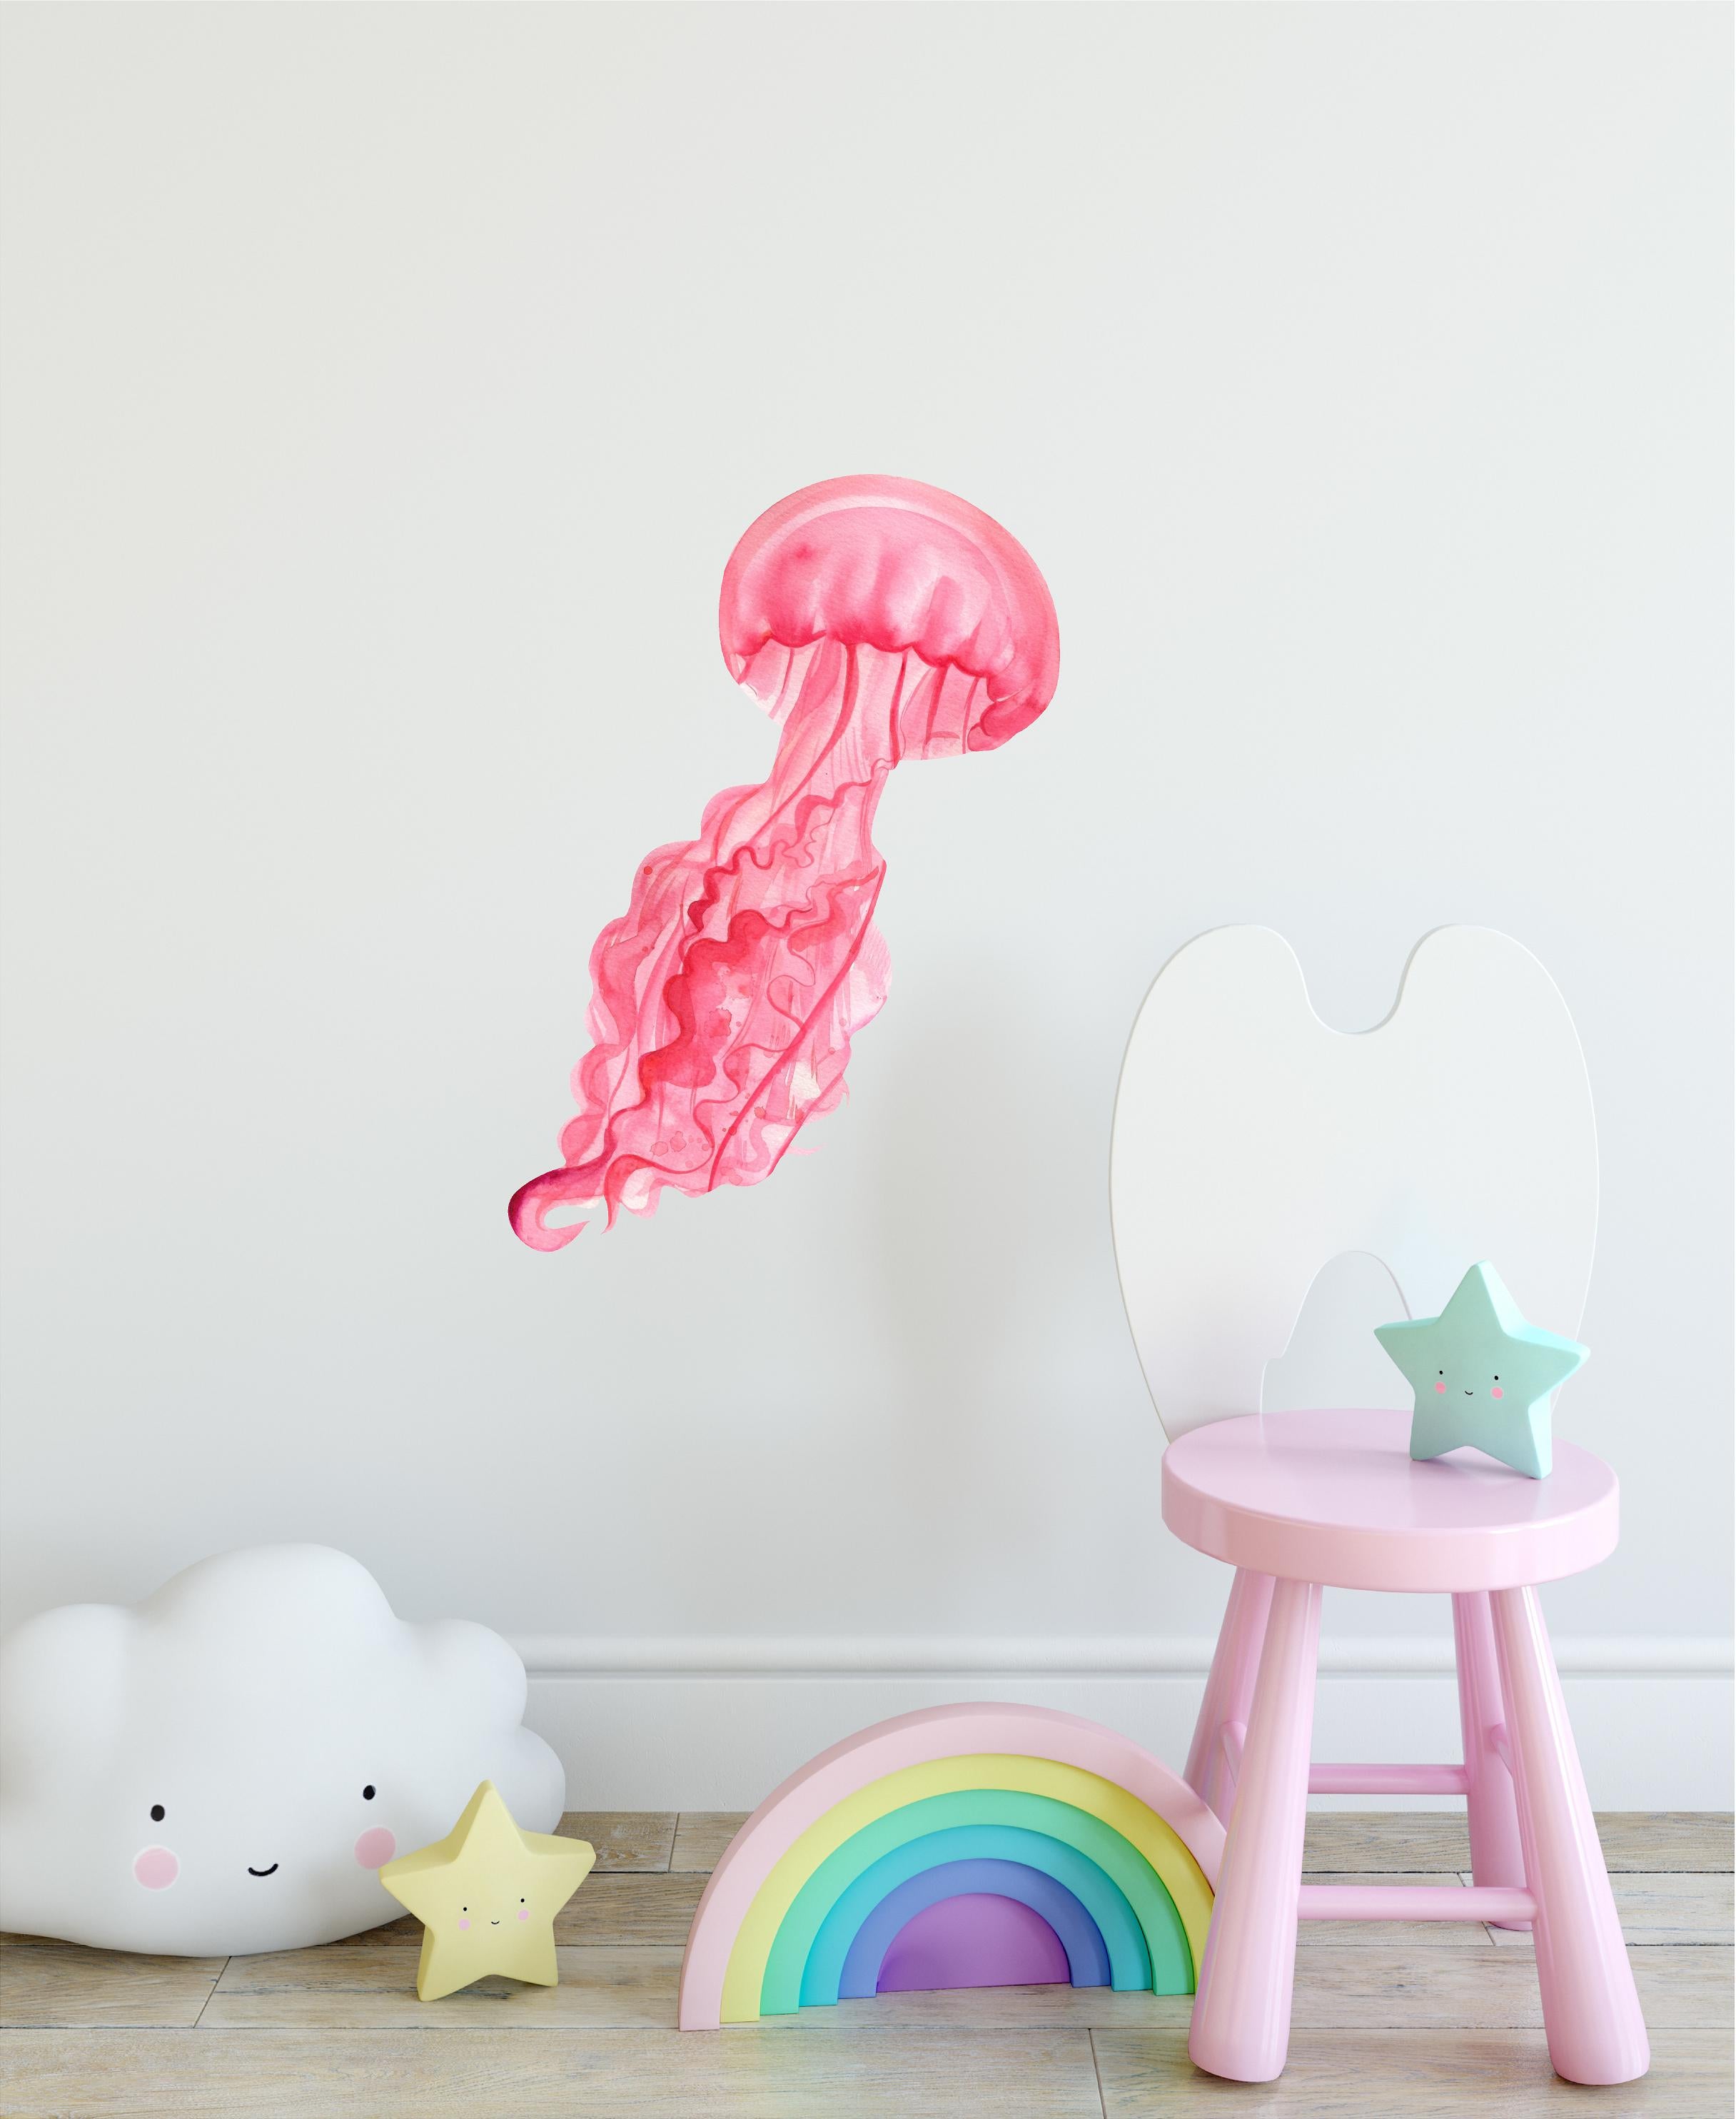 Watercolor Pink Jellyfish Wall Decal Ocean Fish Sea Animal Wall Sticker Removable Fabric Vinyl| DecalBaby